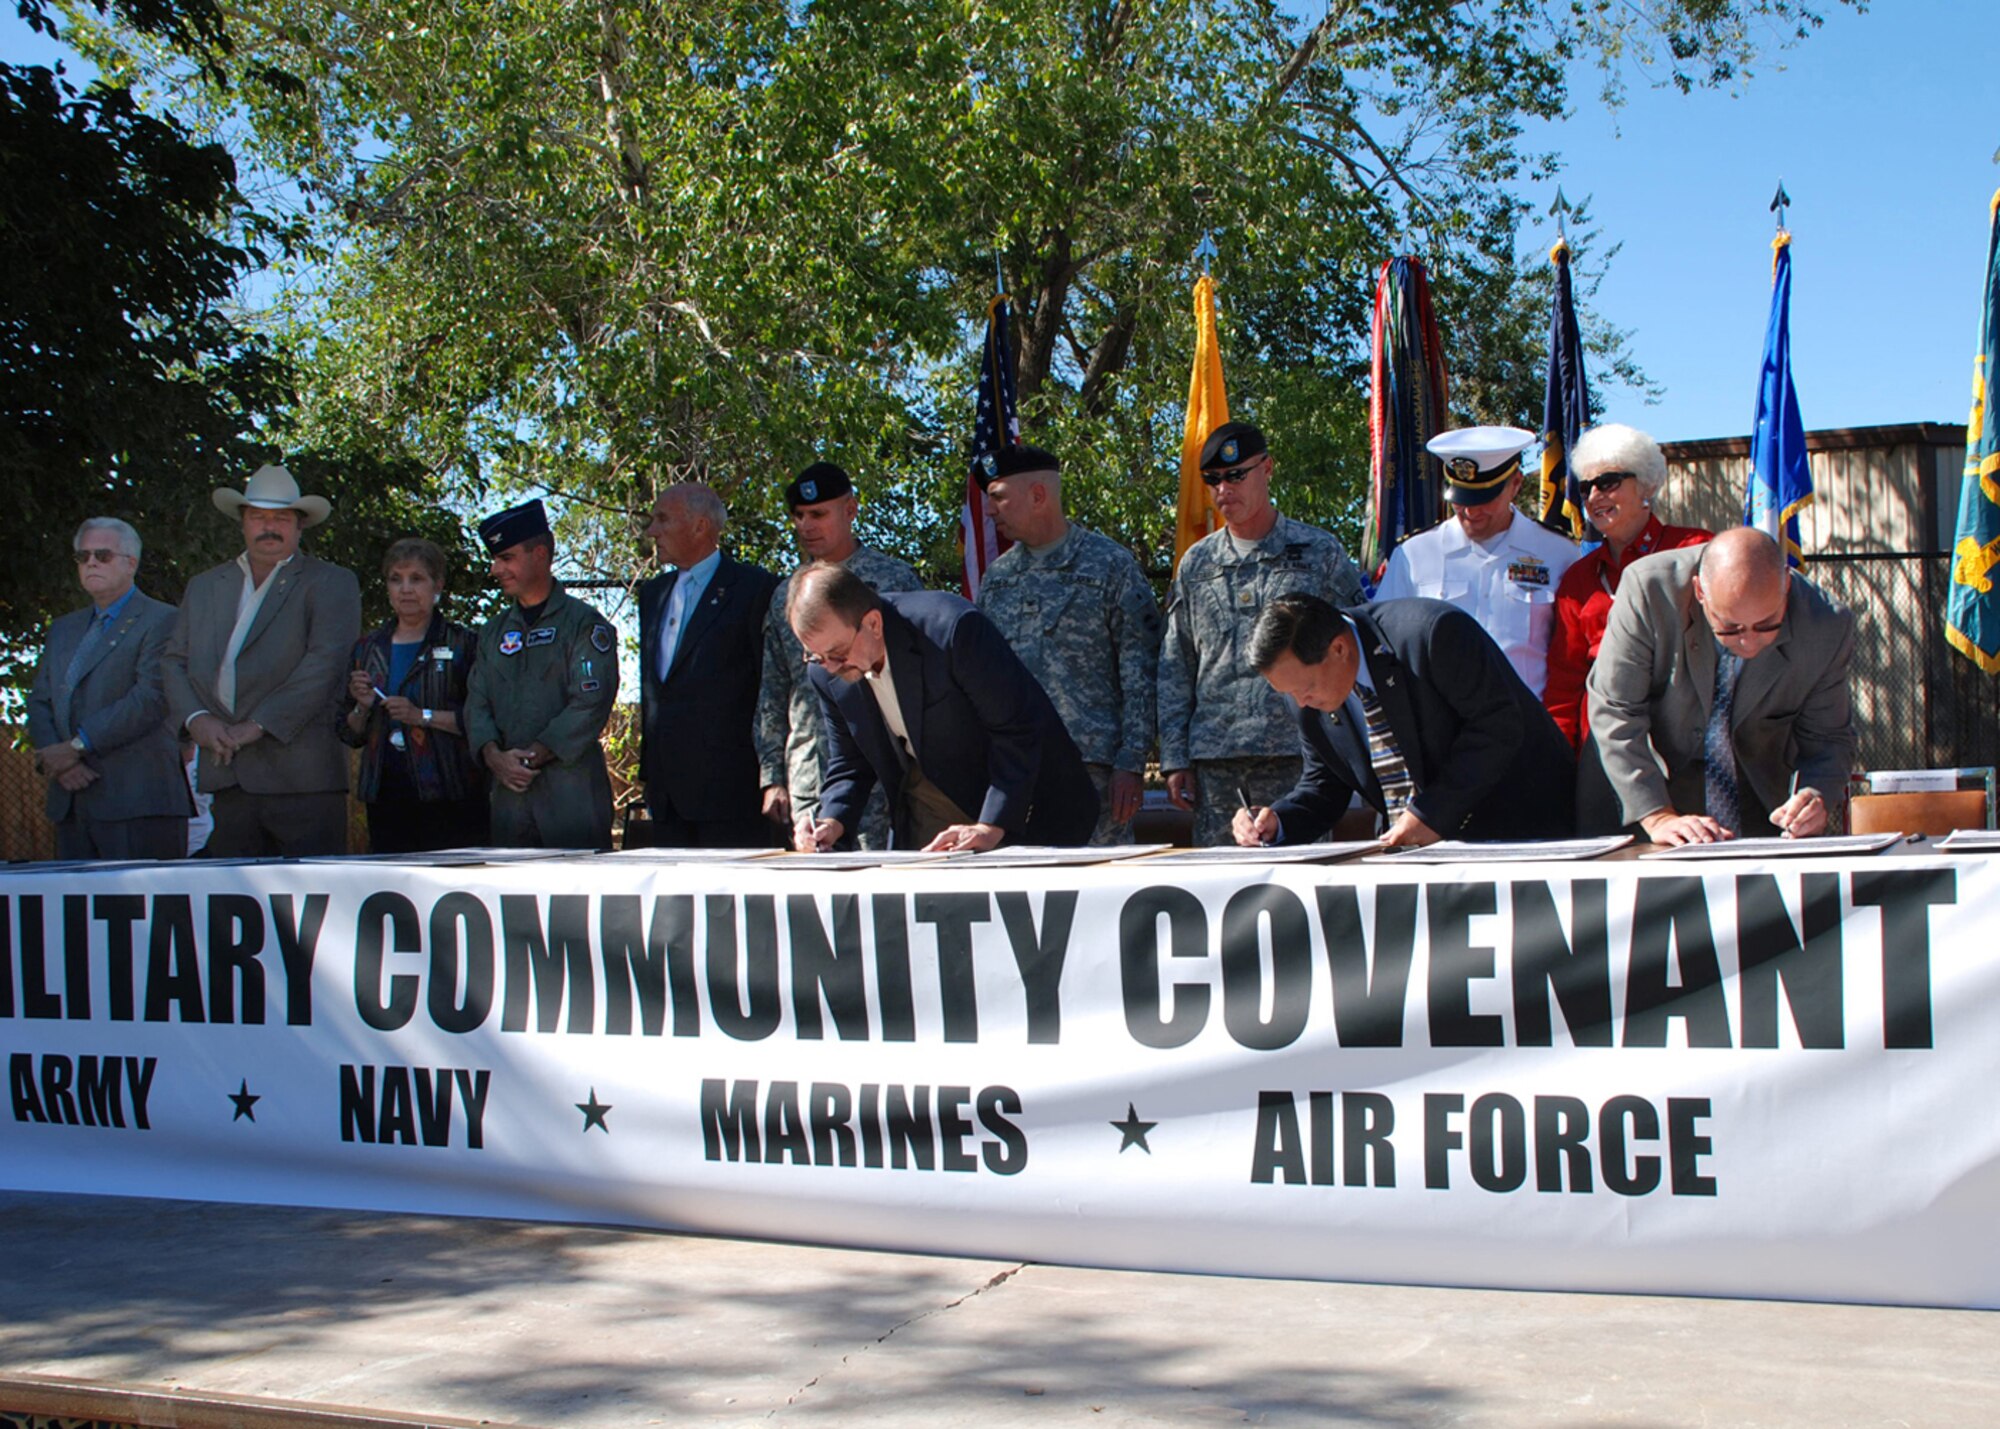 Representatives of Alamogordo, Las Cruces, Holloman Air Force Base, White Sands Missile Range, Ft. Bliss and the New Mexico National Guard sign several copies of the Army Community Covenant at the Alameda Zoo in Alamogordo, N.M. The ceremonial signing was commitment to work together in support of military members and their families (White Sands Missile Range photo by Tom Fuller)